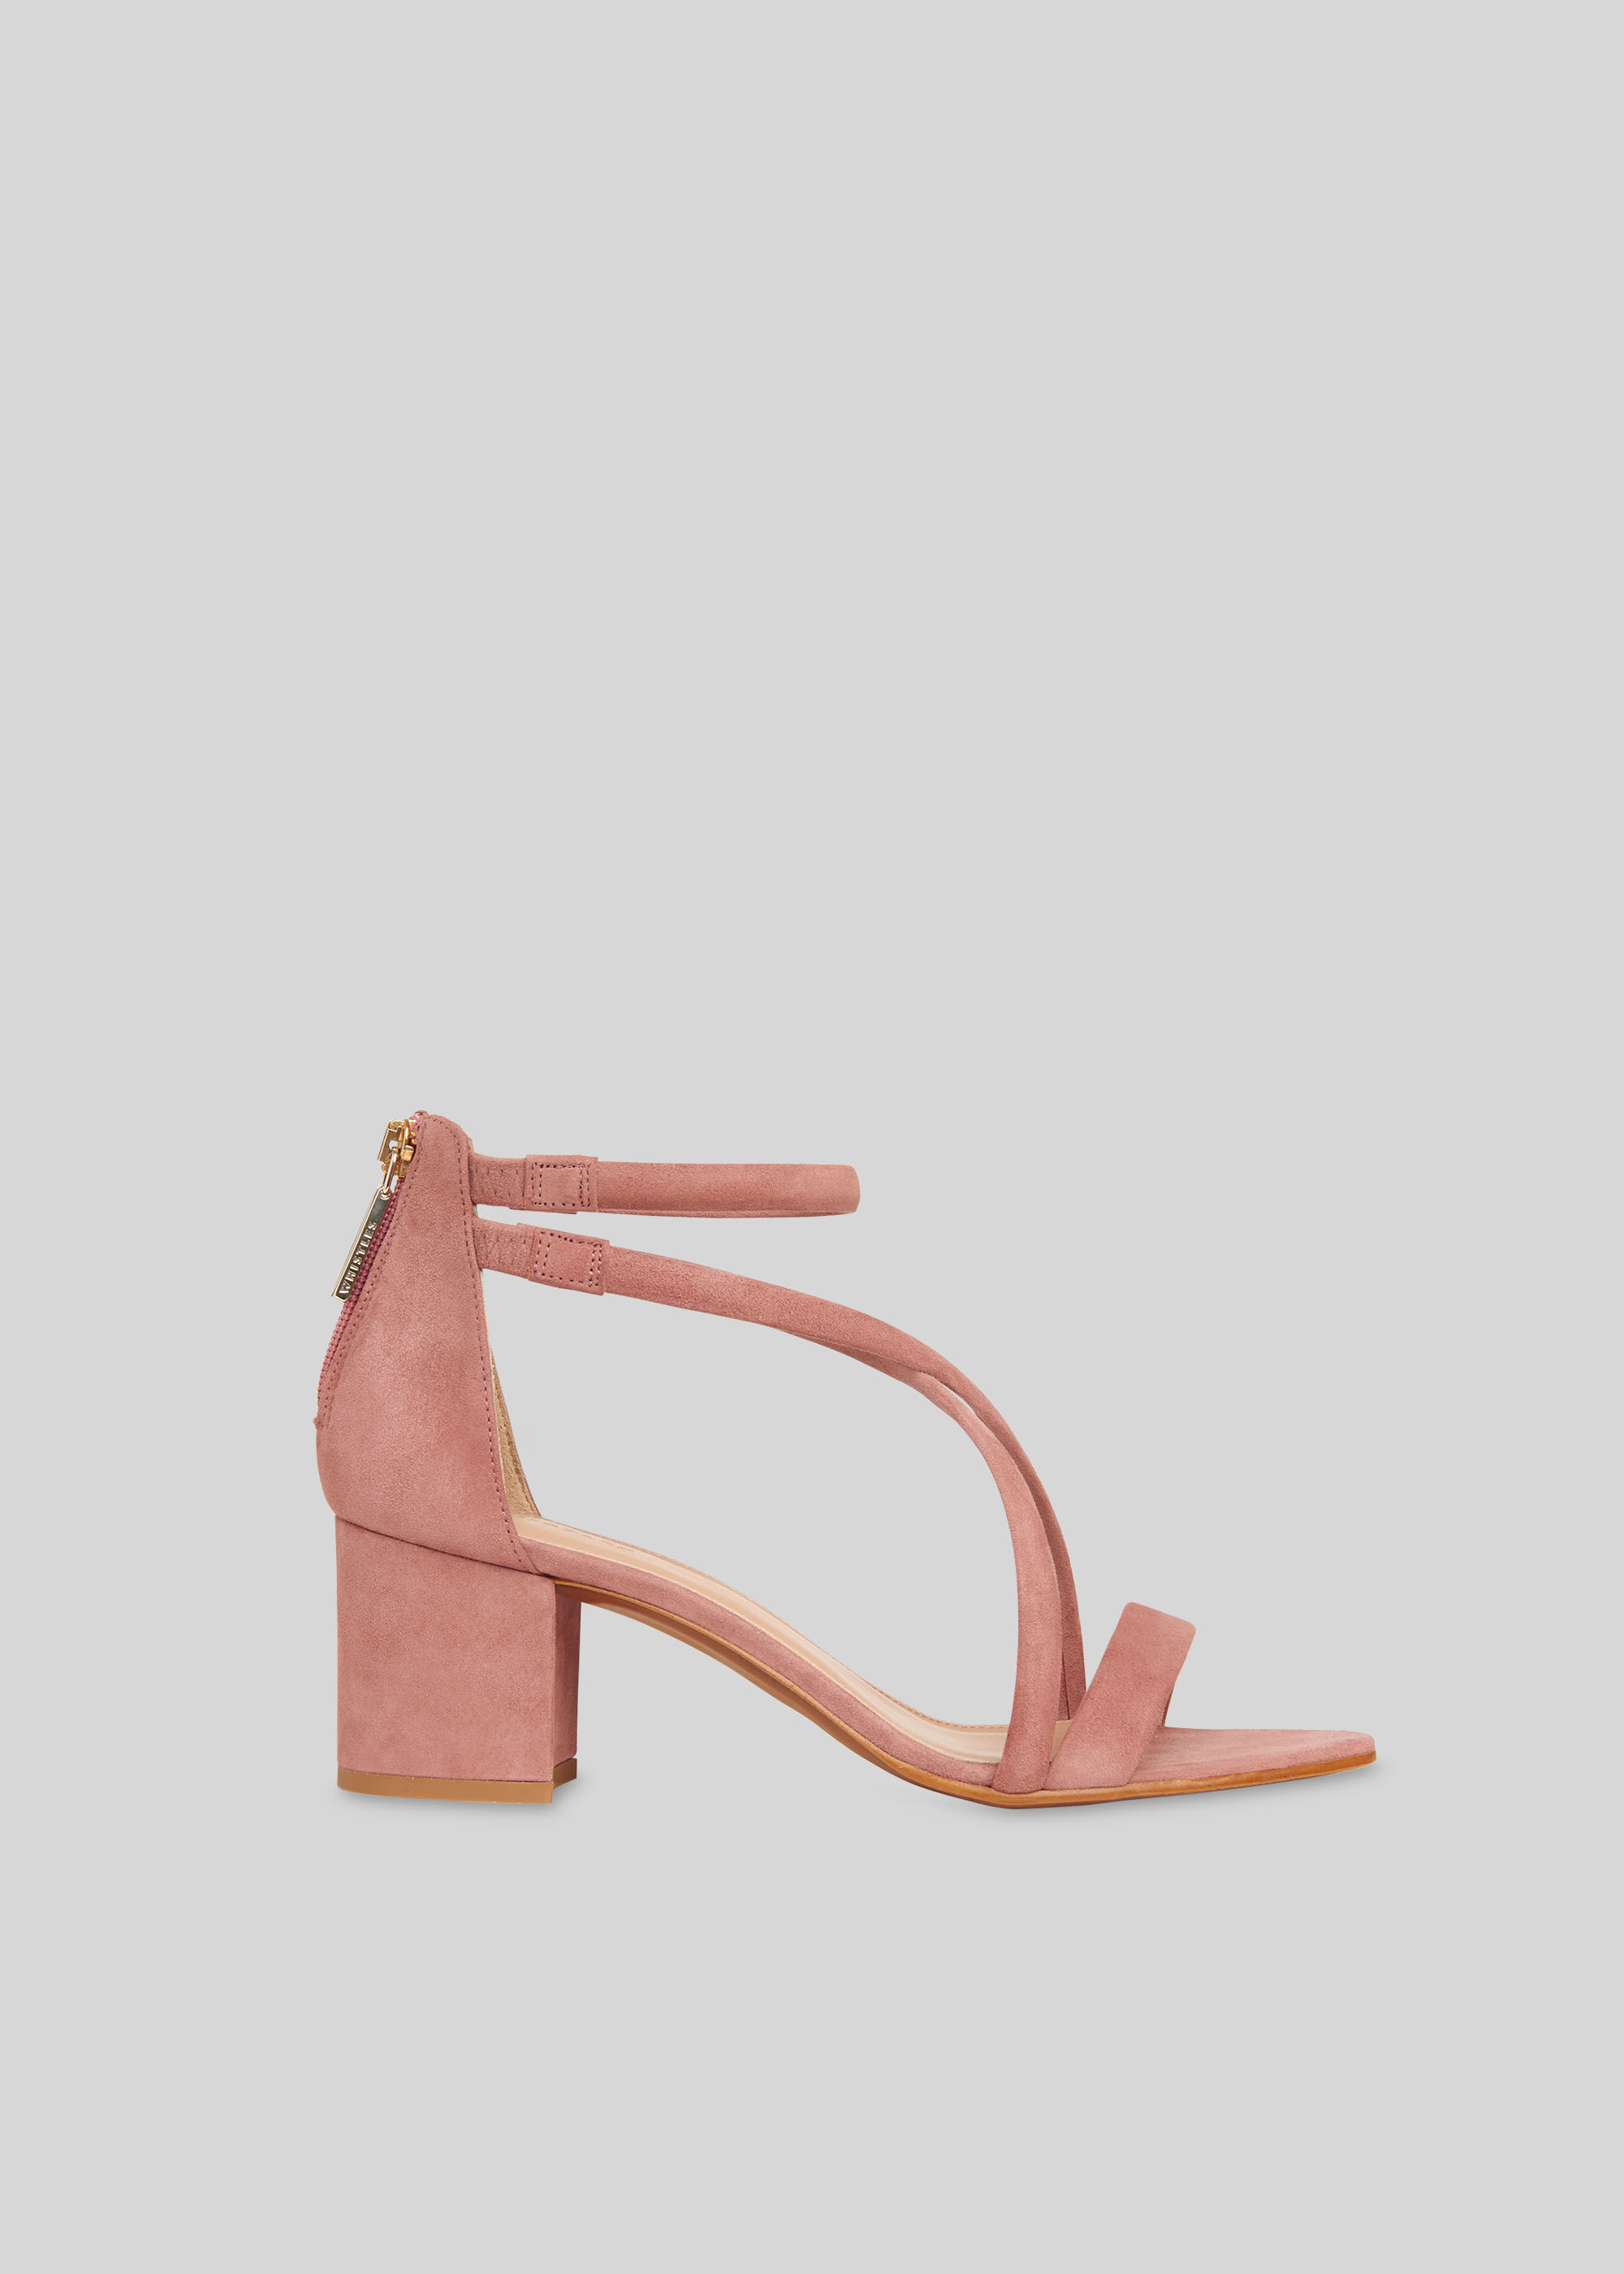 nude shoes strappy